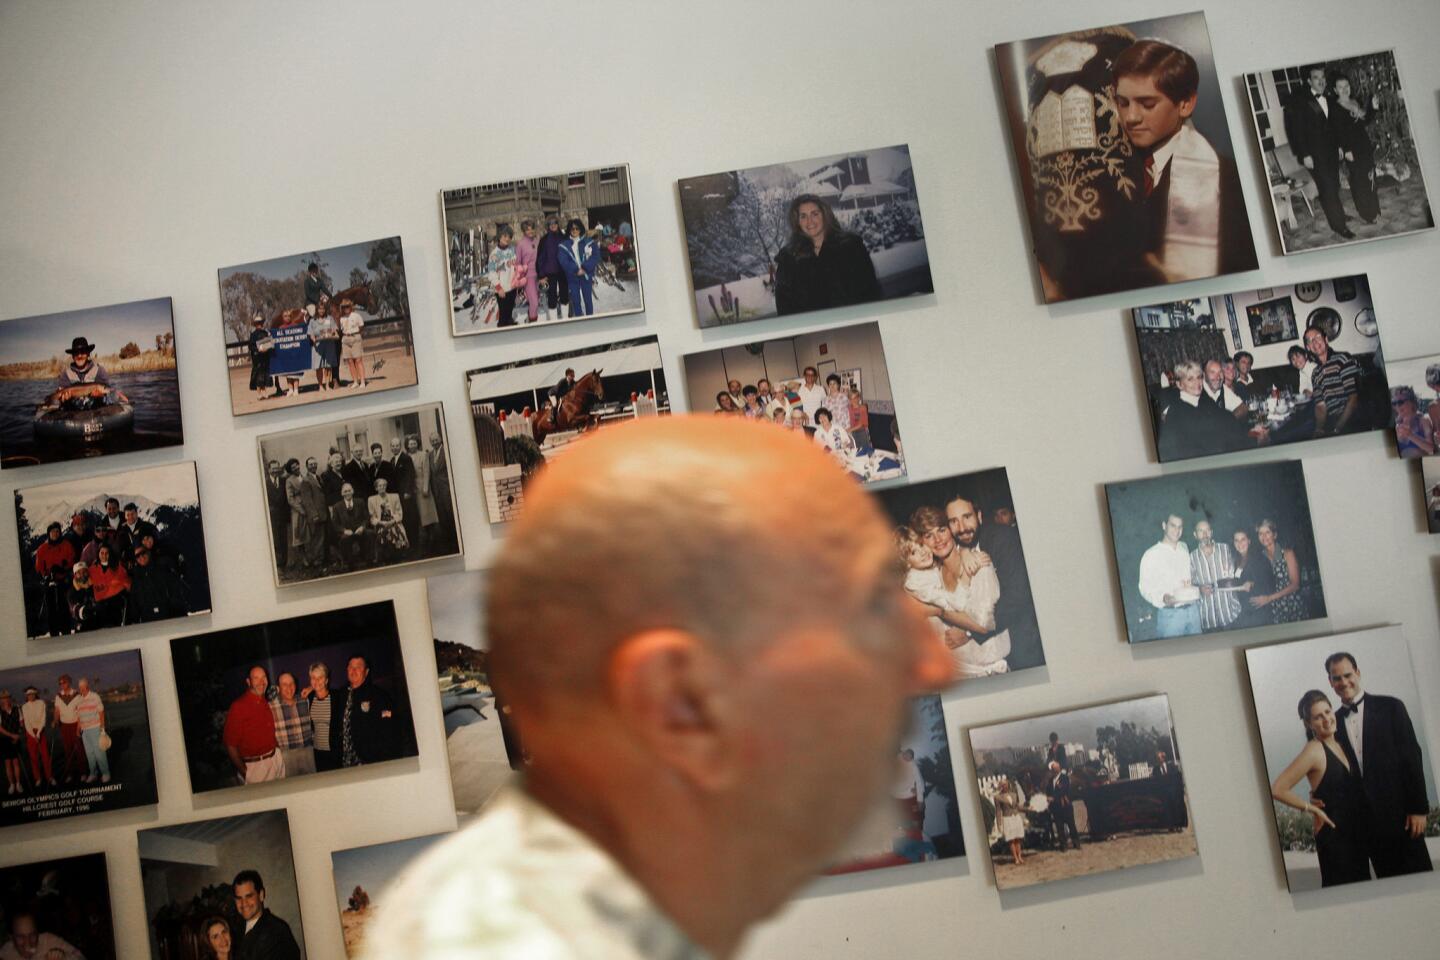 Ken Chiate with a wall of family photos in his Malibu home office.